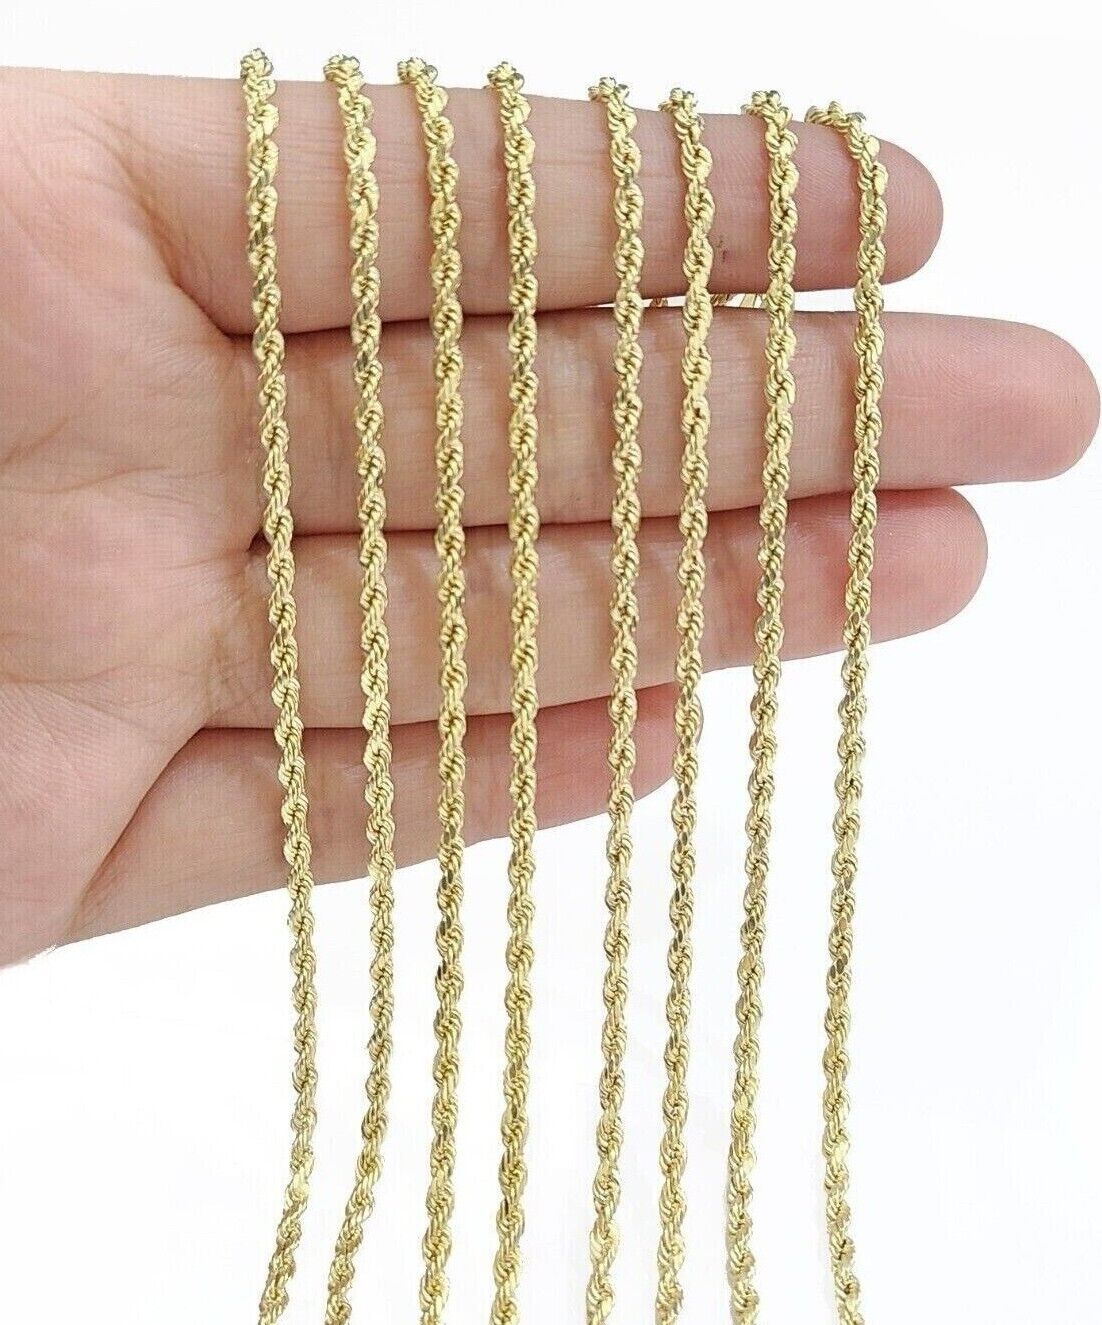 Real 14K Yellow Gold Rope Chain Necklace 2.5mm 18-30 inch Diamond Cut 14kt Sale 30in / 2.5mm